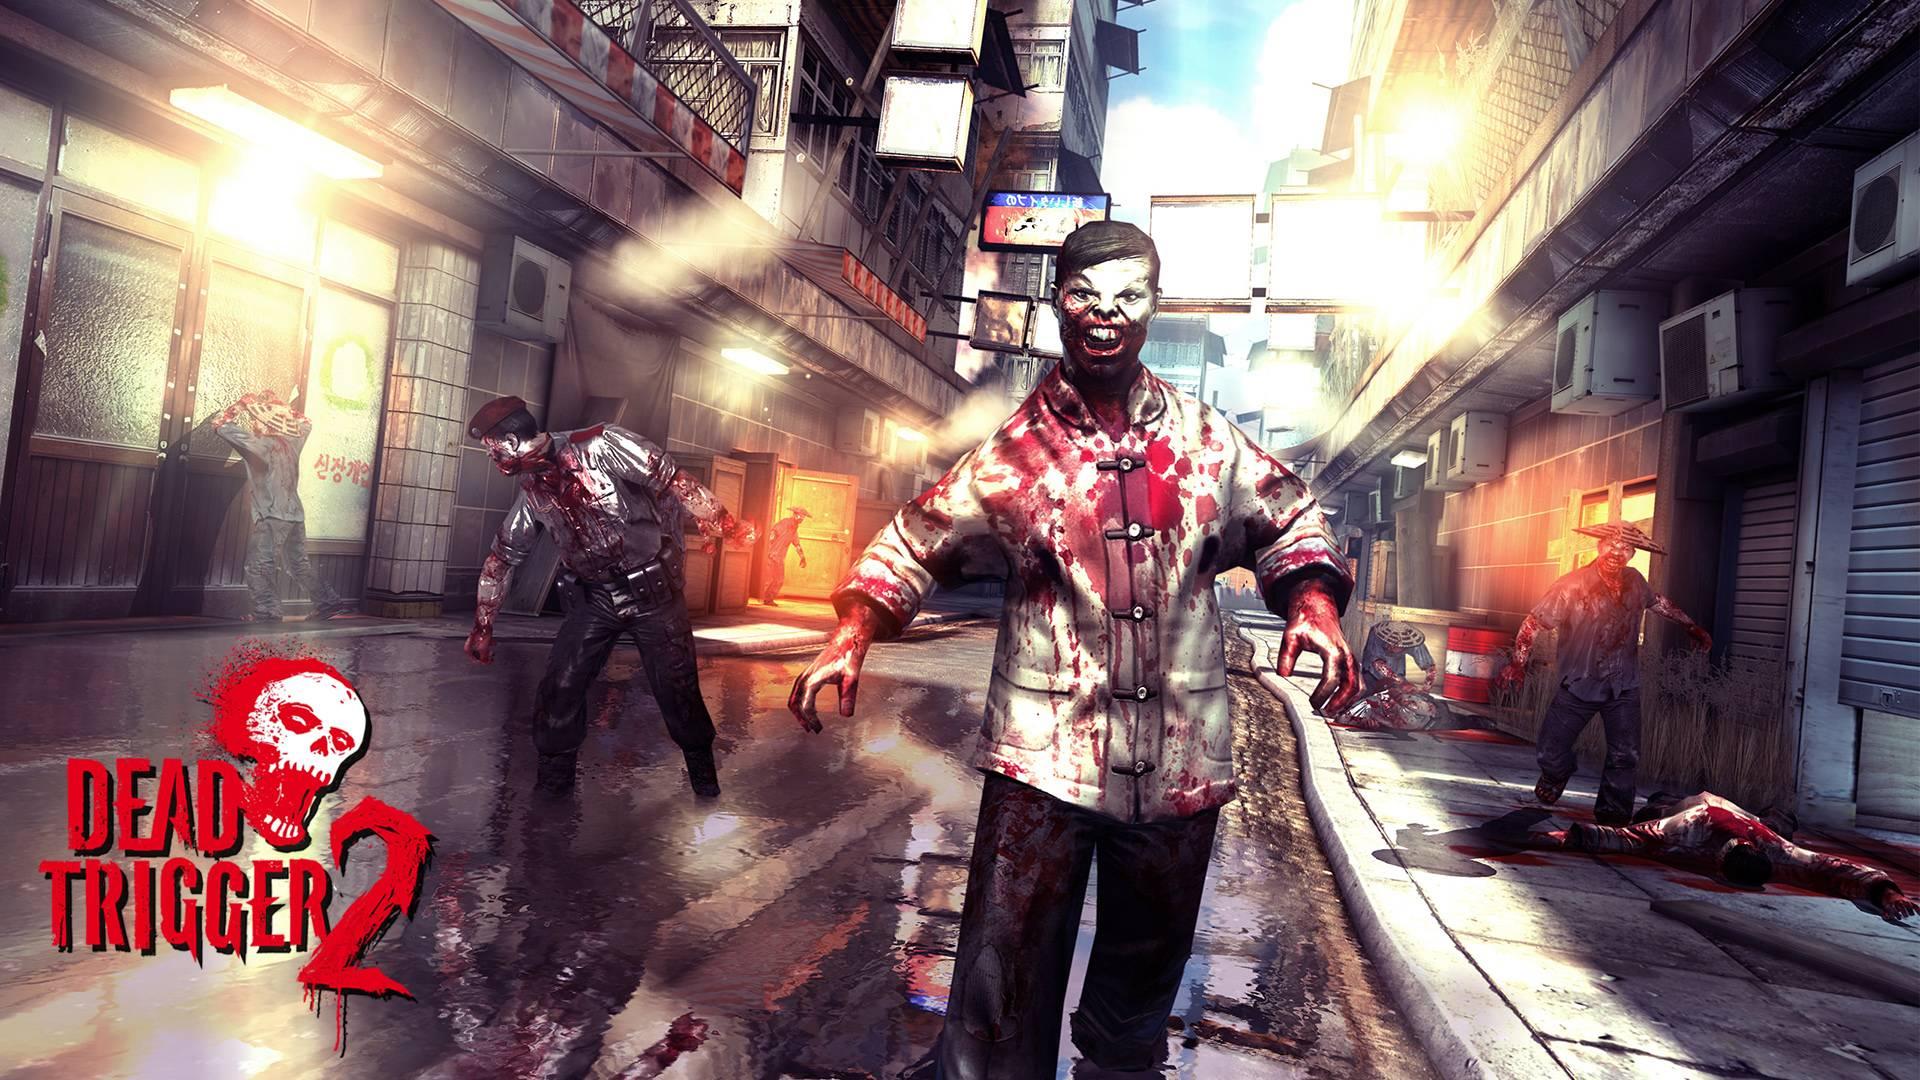 Dead Trigger 2 Big Update arrives with Christmas presents